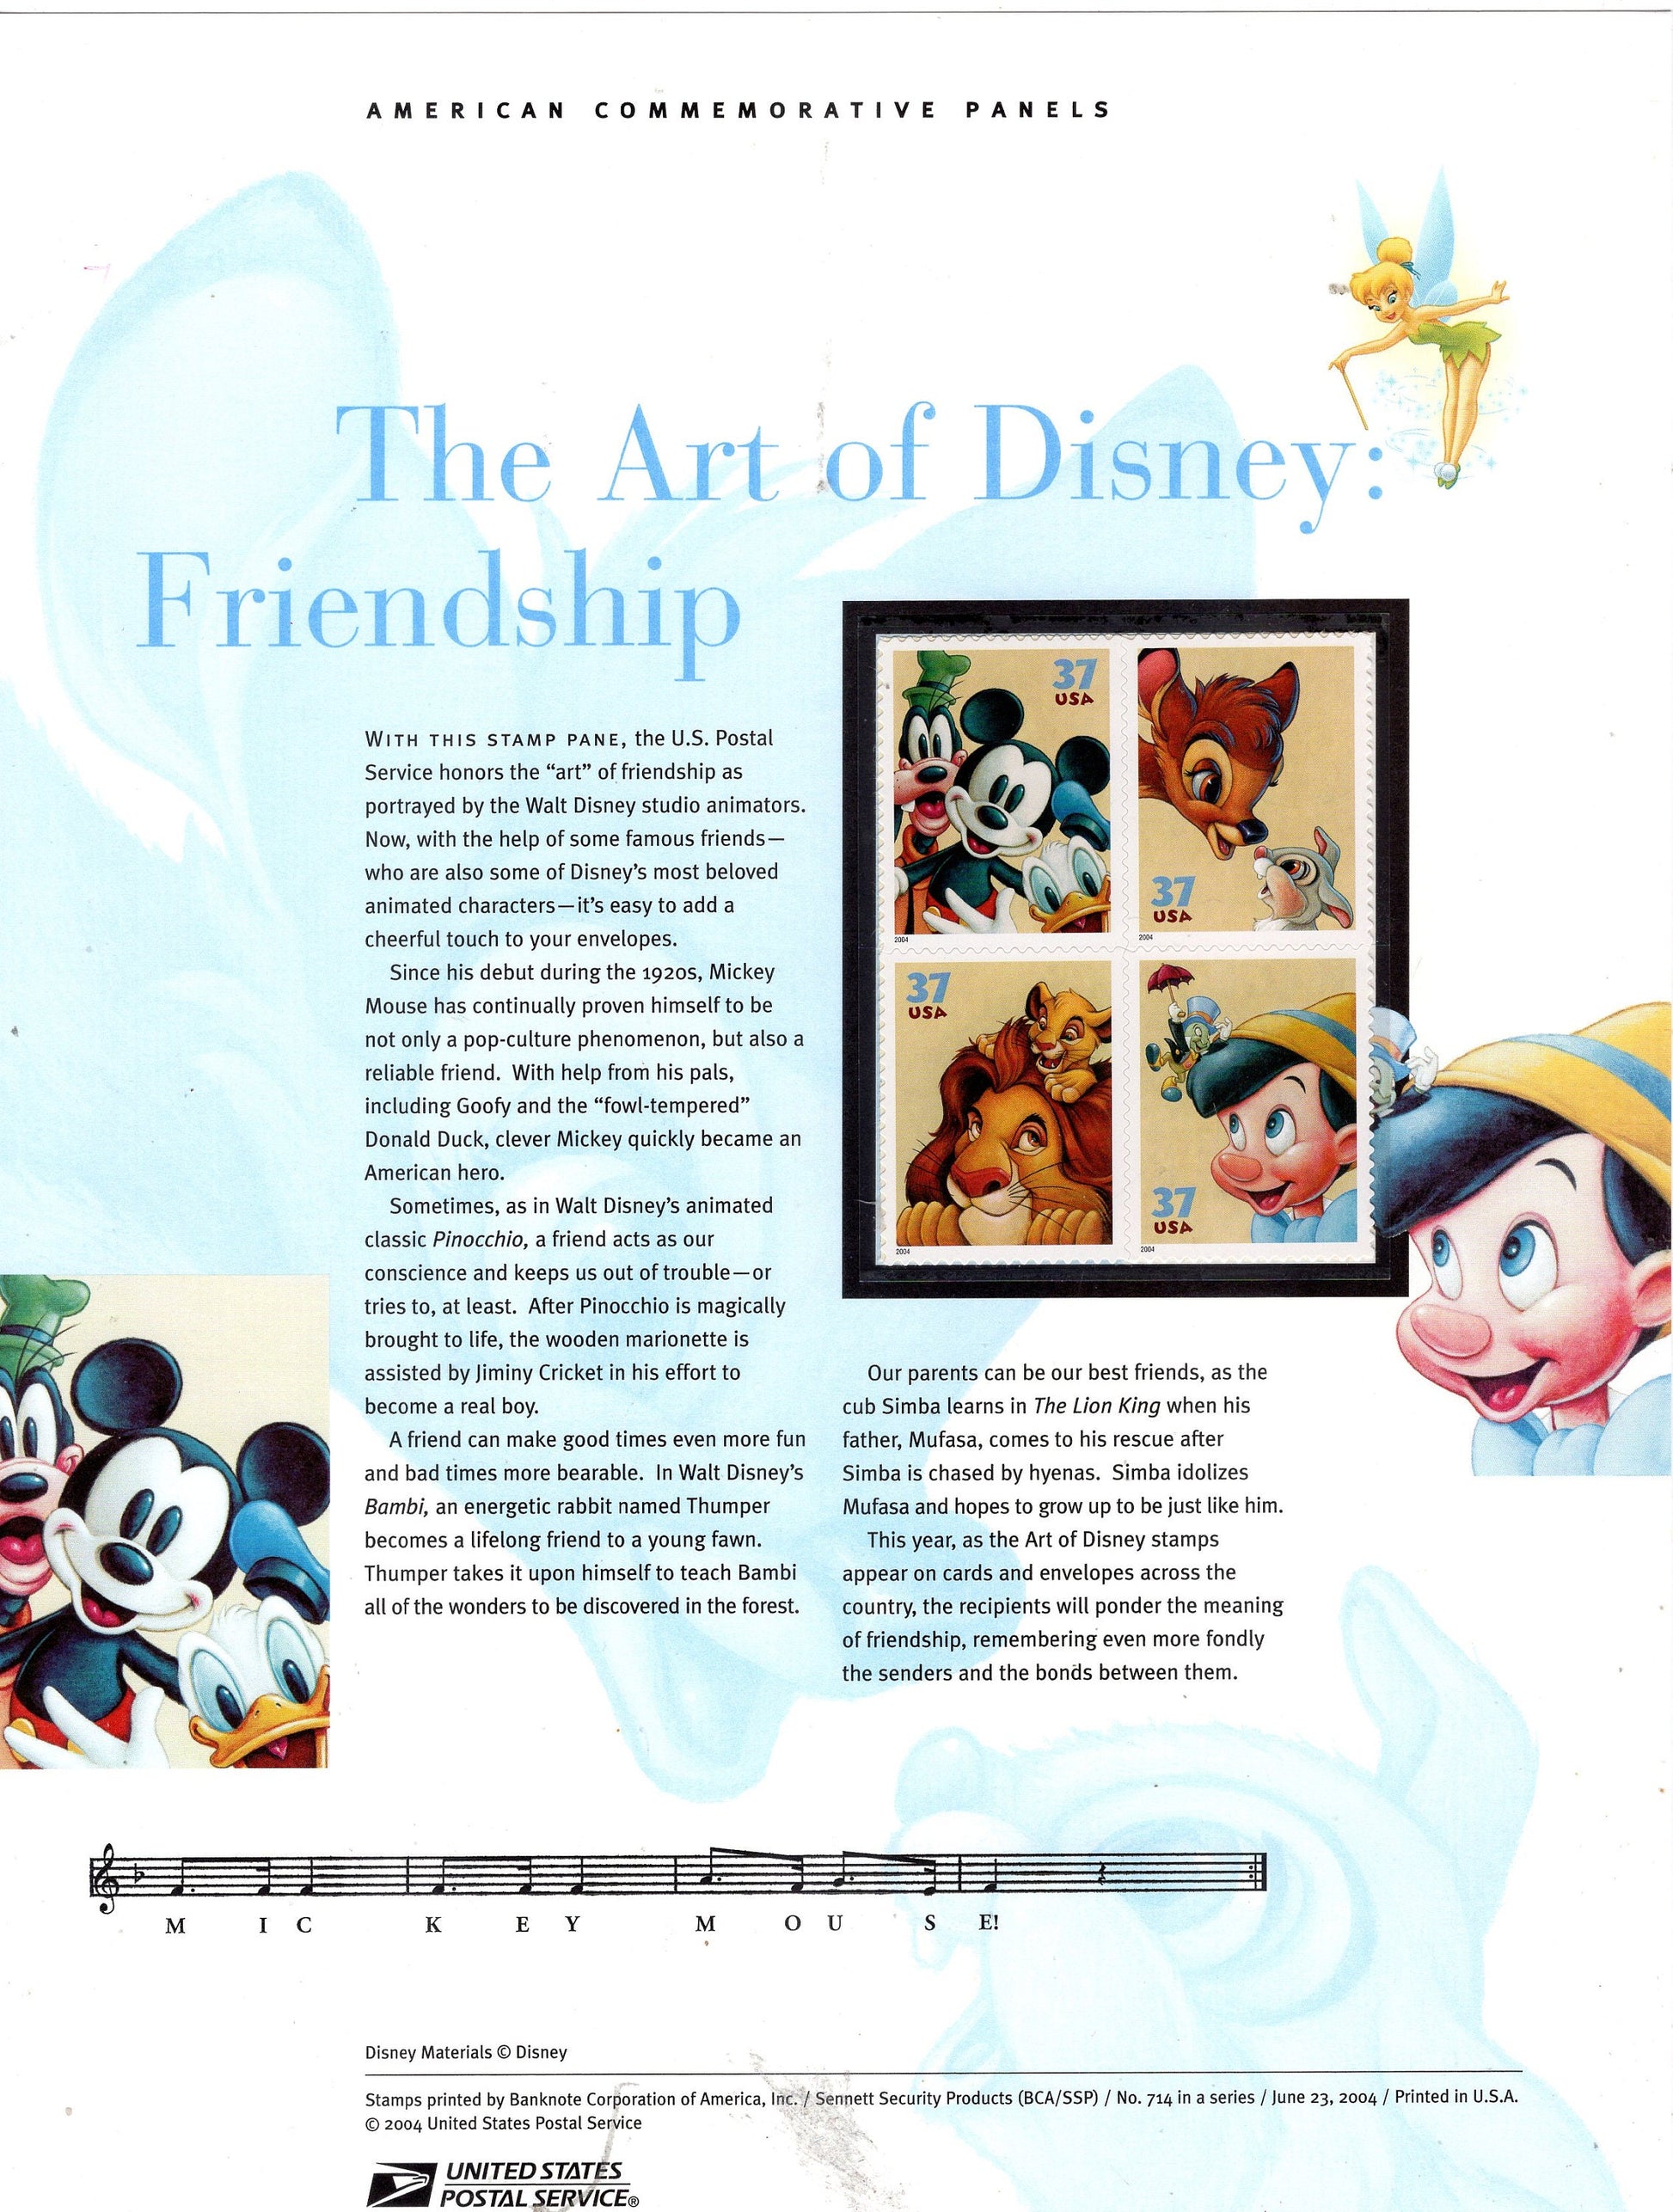 DISNEY FRIENDSHIP ART Mickey Pinocchio Simba Commemorative Panel with Block 4 Stamps Illustrations plus Text – A Great Gift 8.5x11-2004-